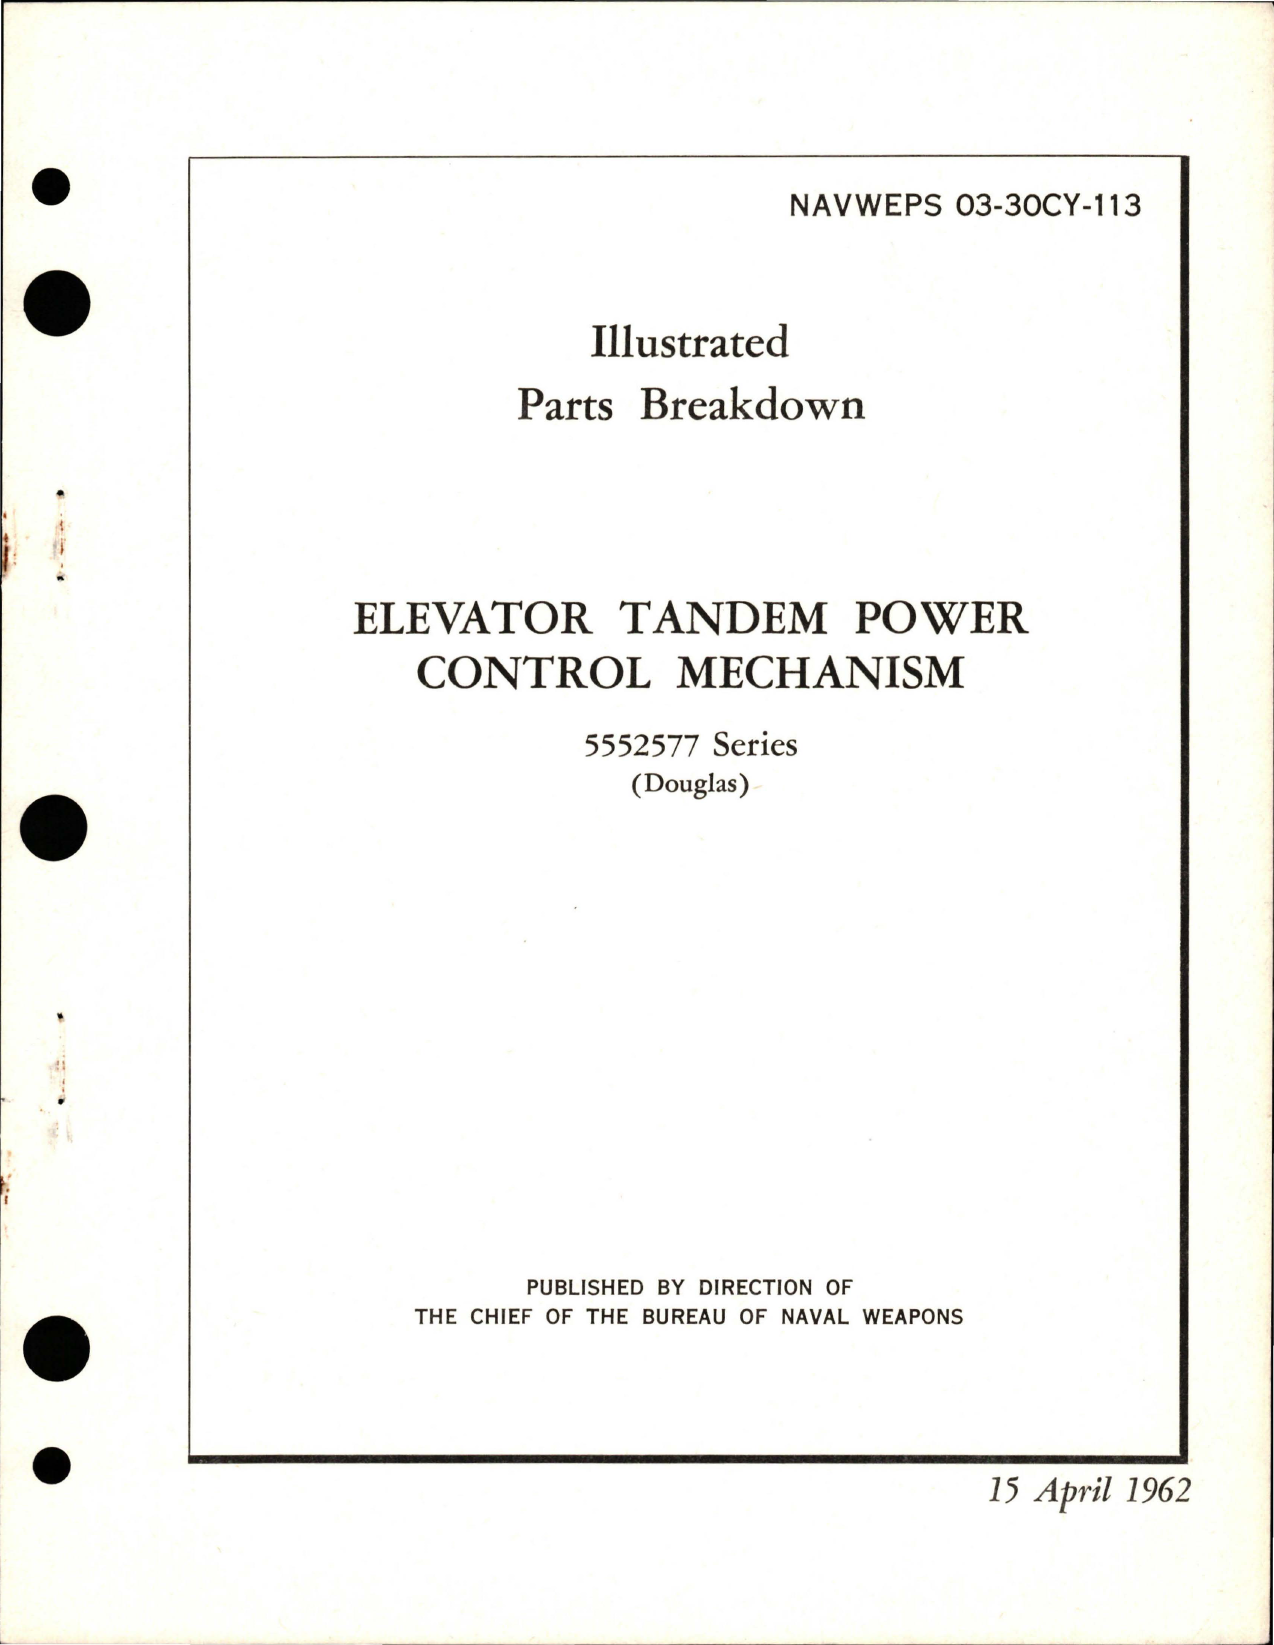 Sample page 1 from AirCorps Library document: Illustrated Parts Breakdown for Elevator Tandem Power Control Mechanism - 5552577 Series